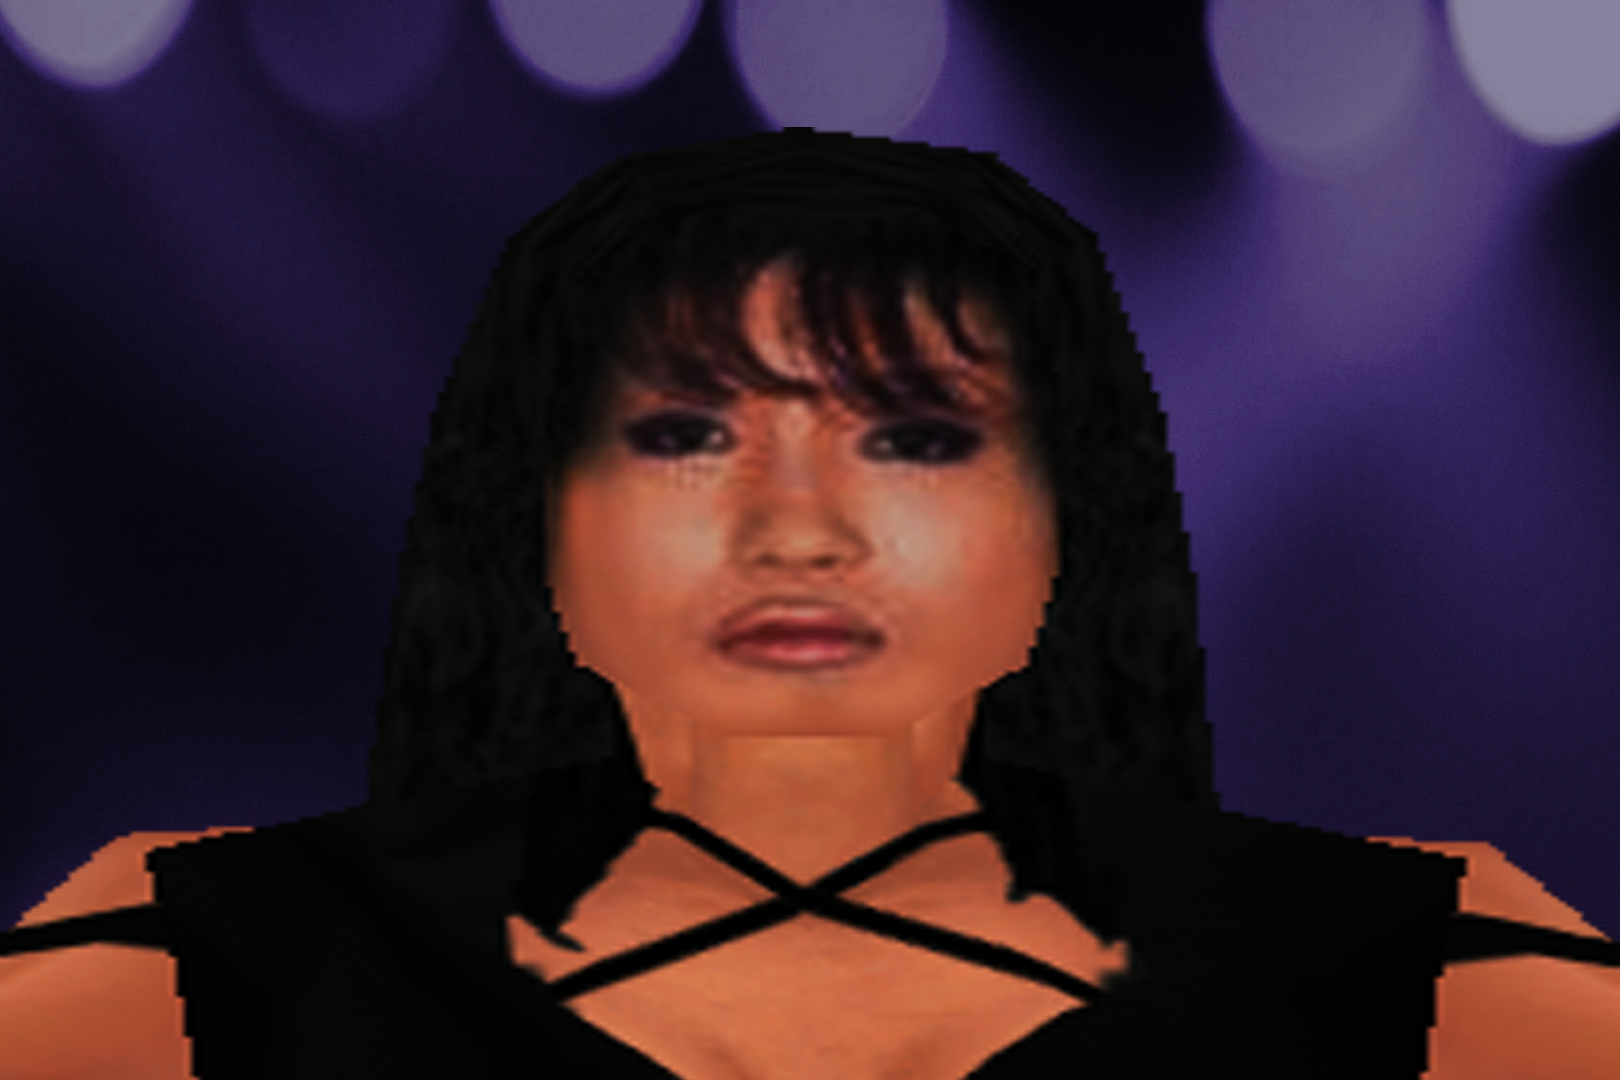 Not in Hall of Fame - 219. Manami Toyota